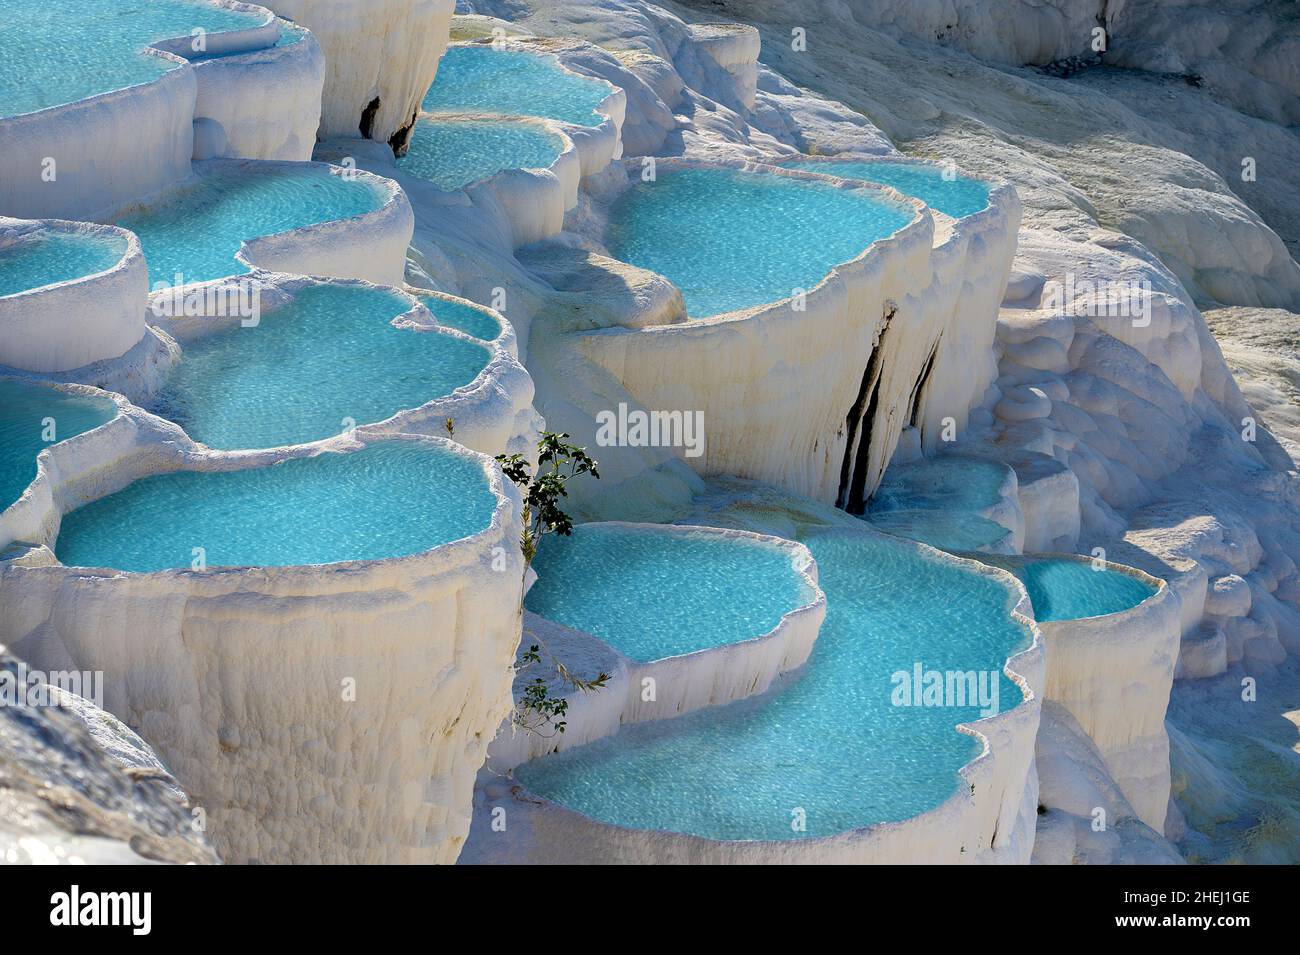 Pamukkale hot spring travertine pools, Turkey. Pamukkale's terraces are made of travertine, a sedimentary rock deposited by mineral water from the hot Stock Photo